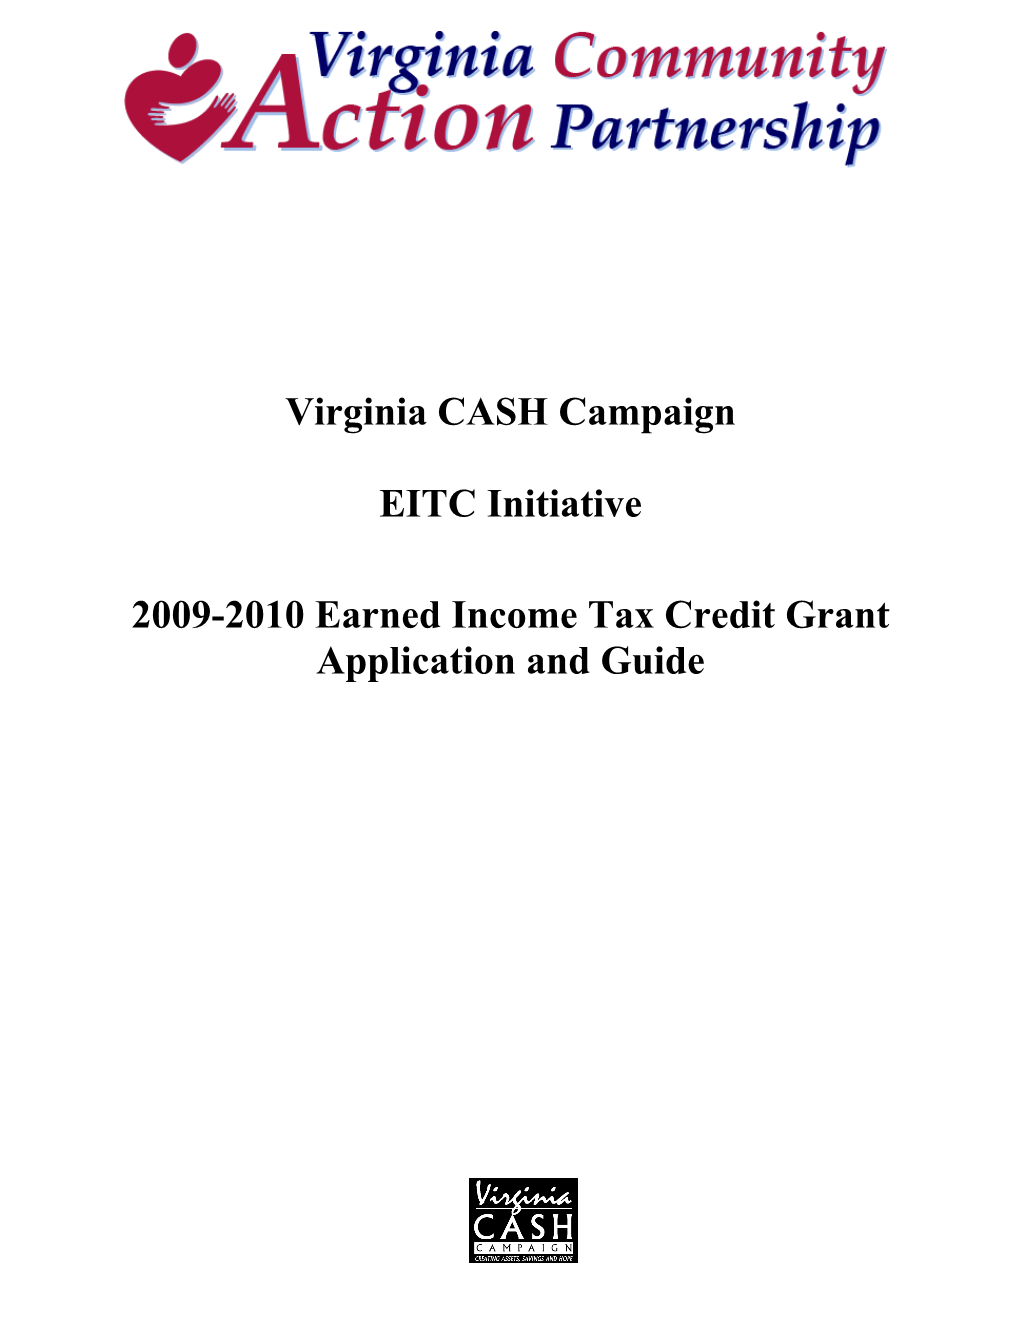 2009-2010 Earned Income Tax Credit Grant Application and Guide